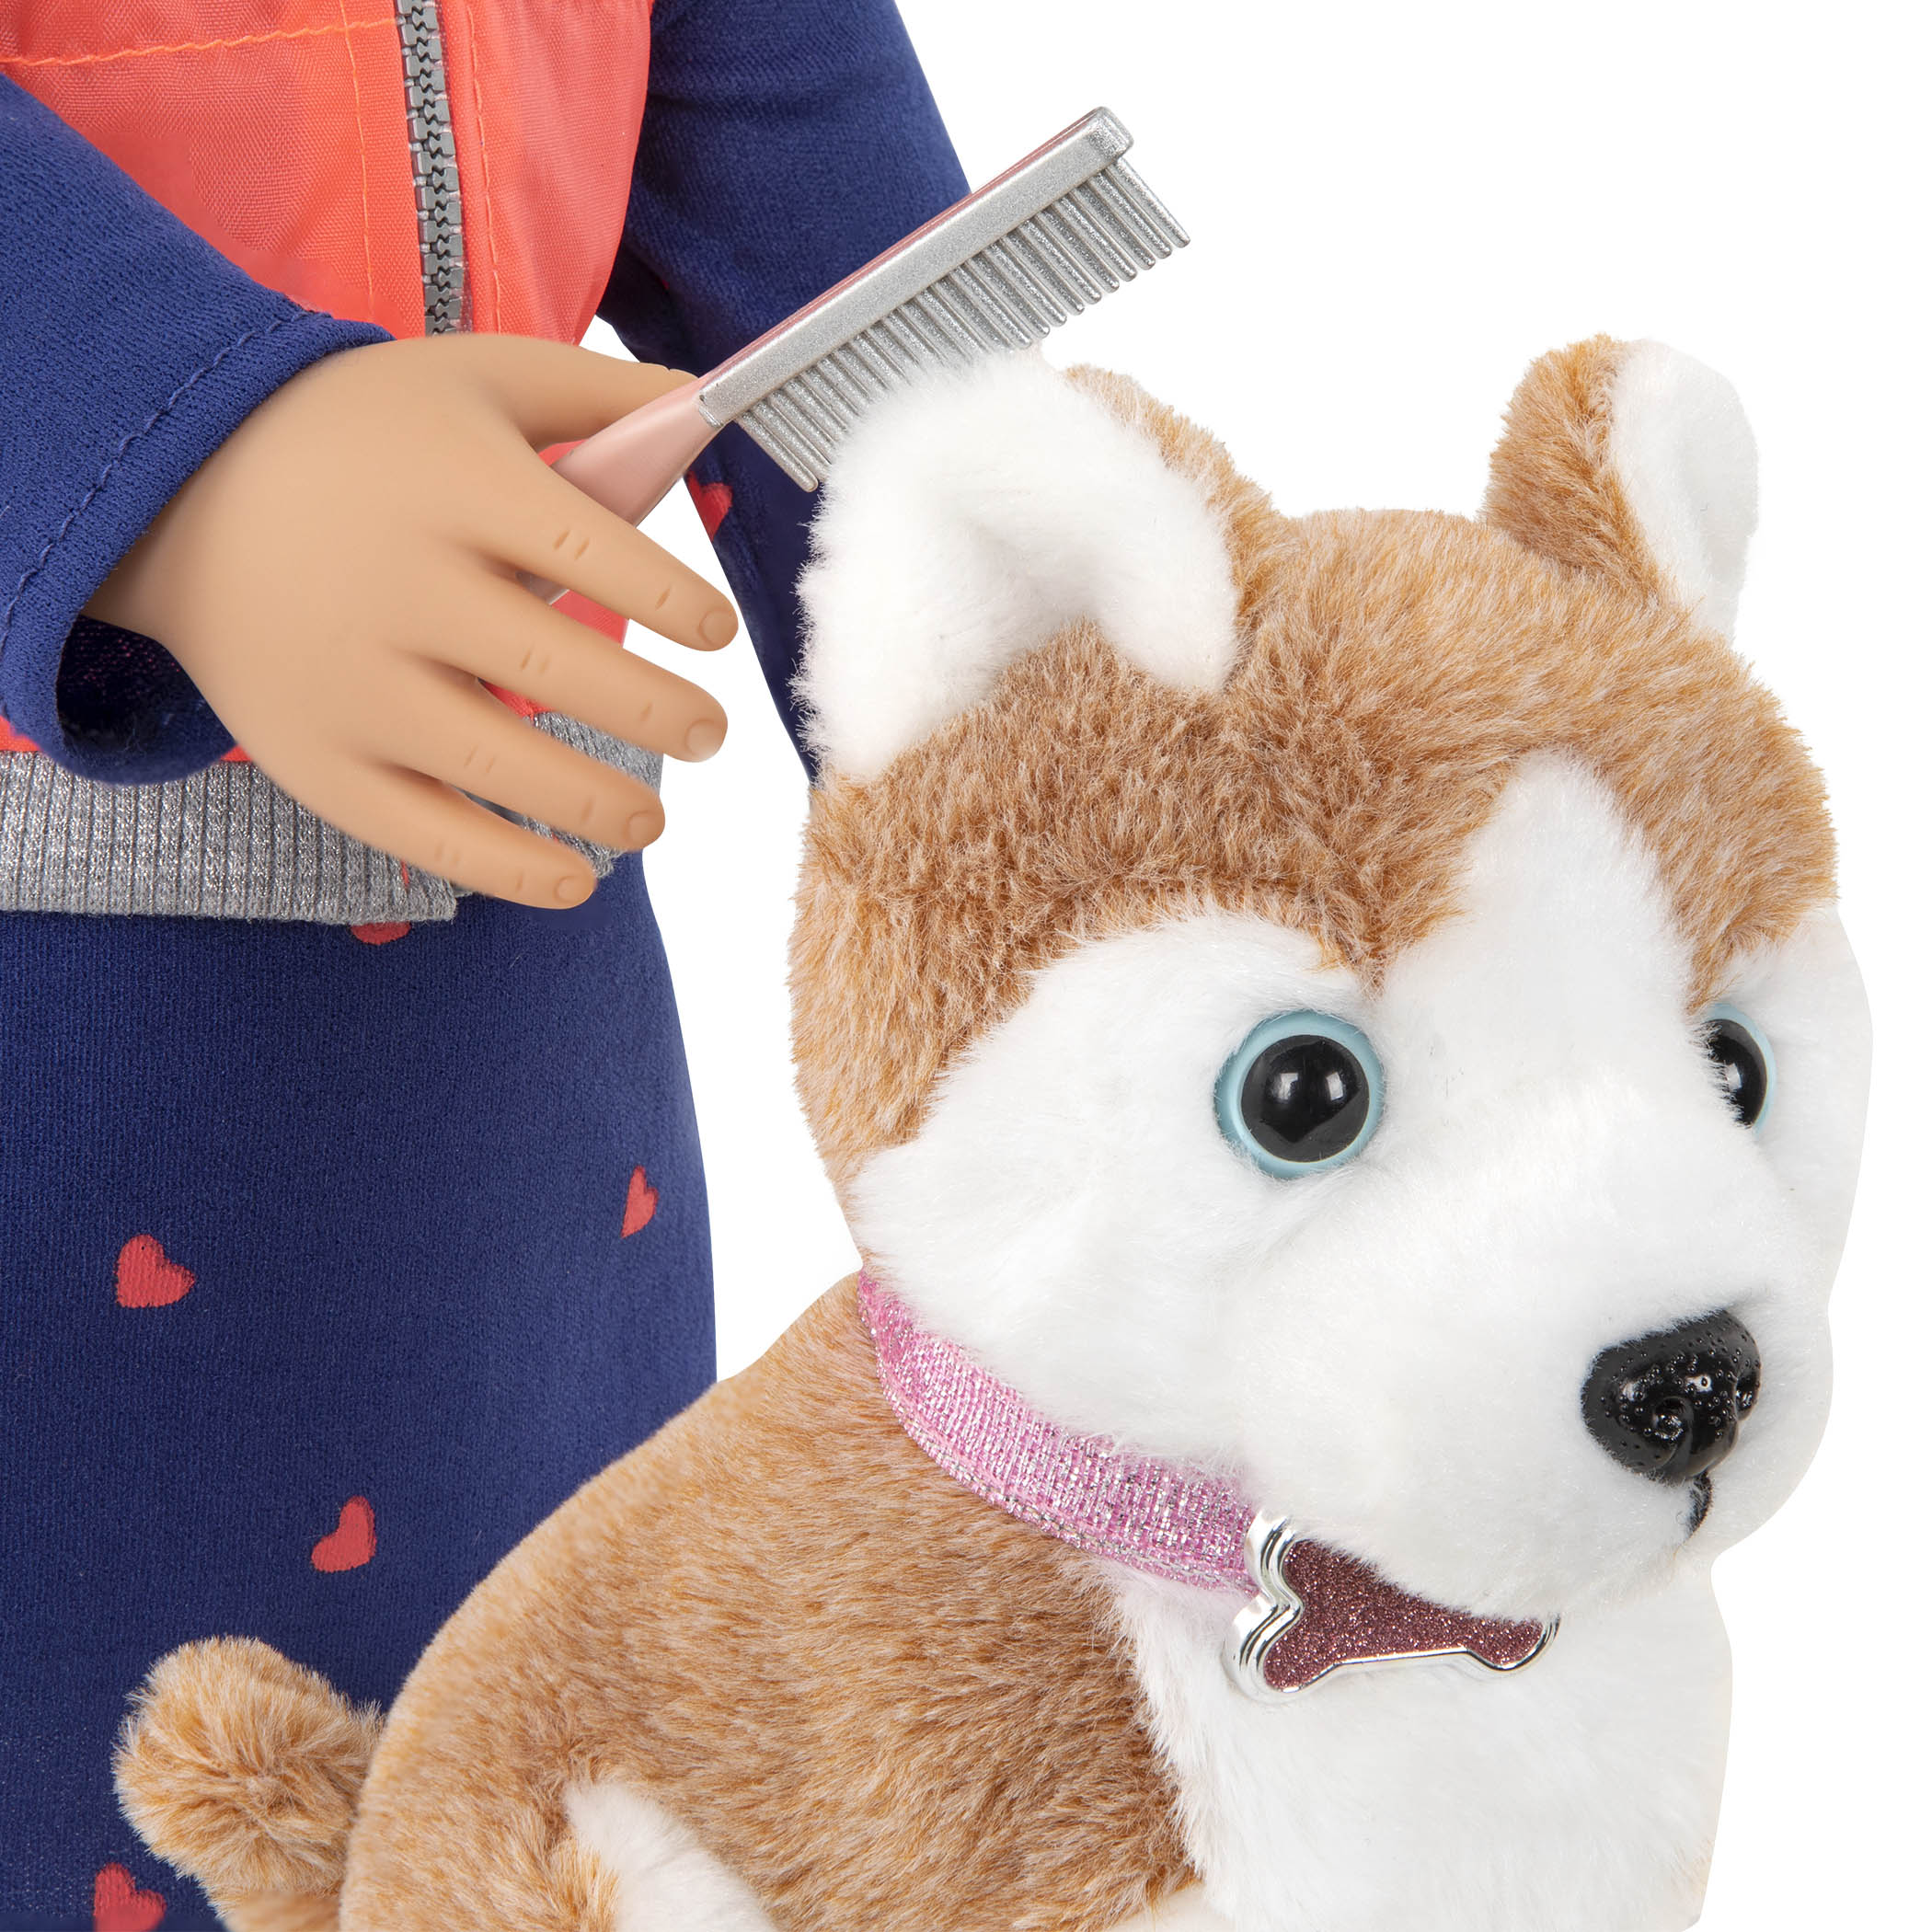 18-inch doll with brown hair, brown eyes and dog accessories walking husky plushie